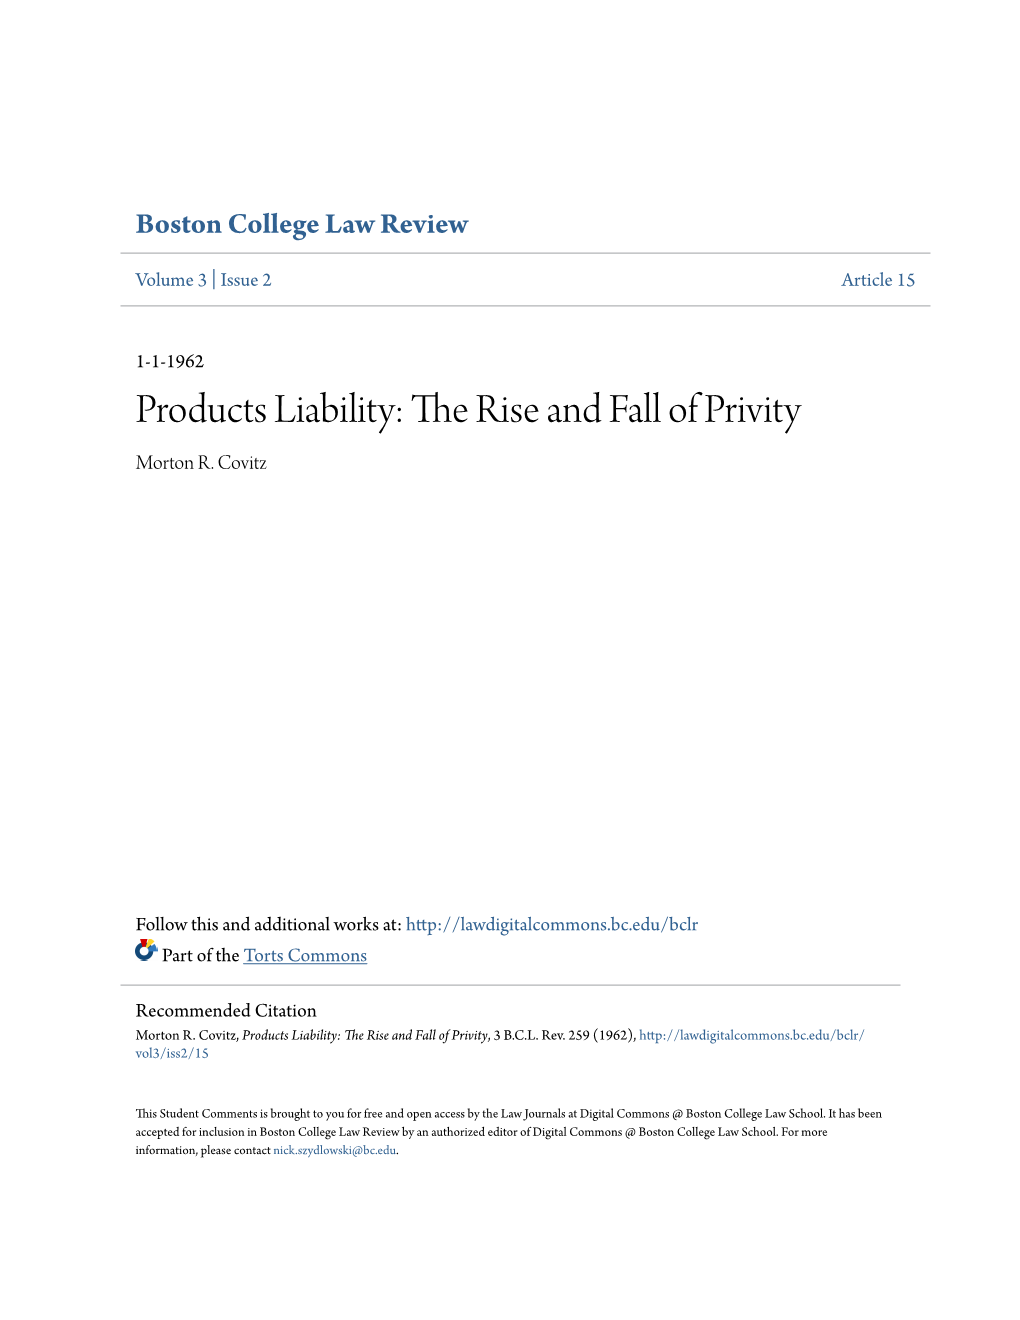 Products Liability: the Rise and Fall of Privity Morton R